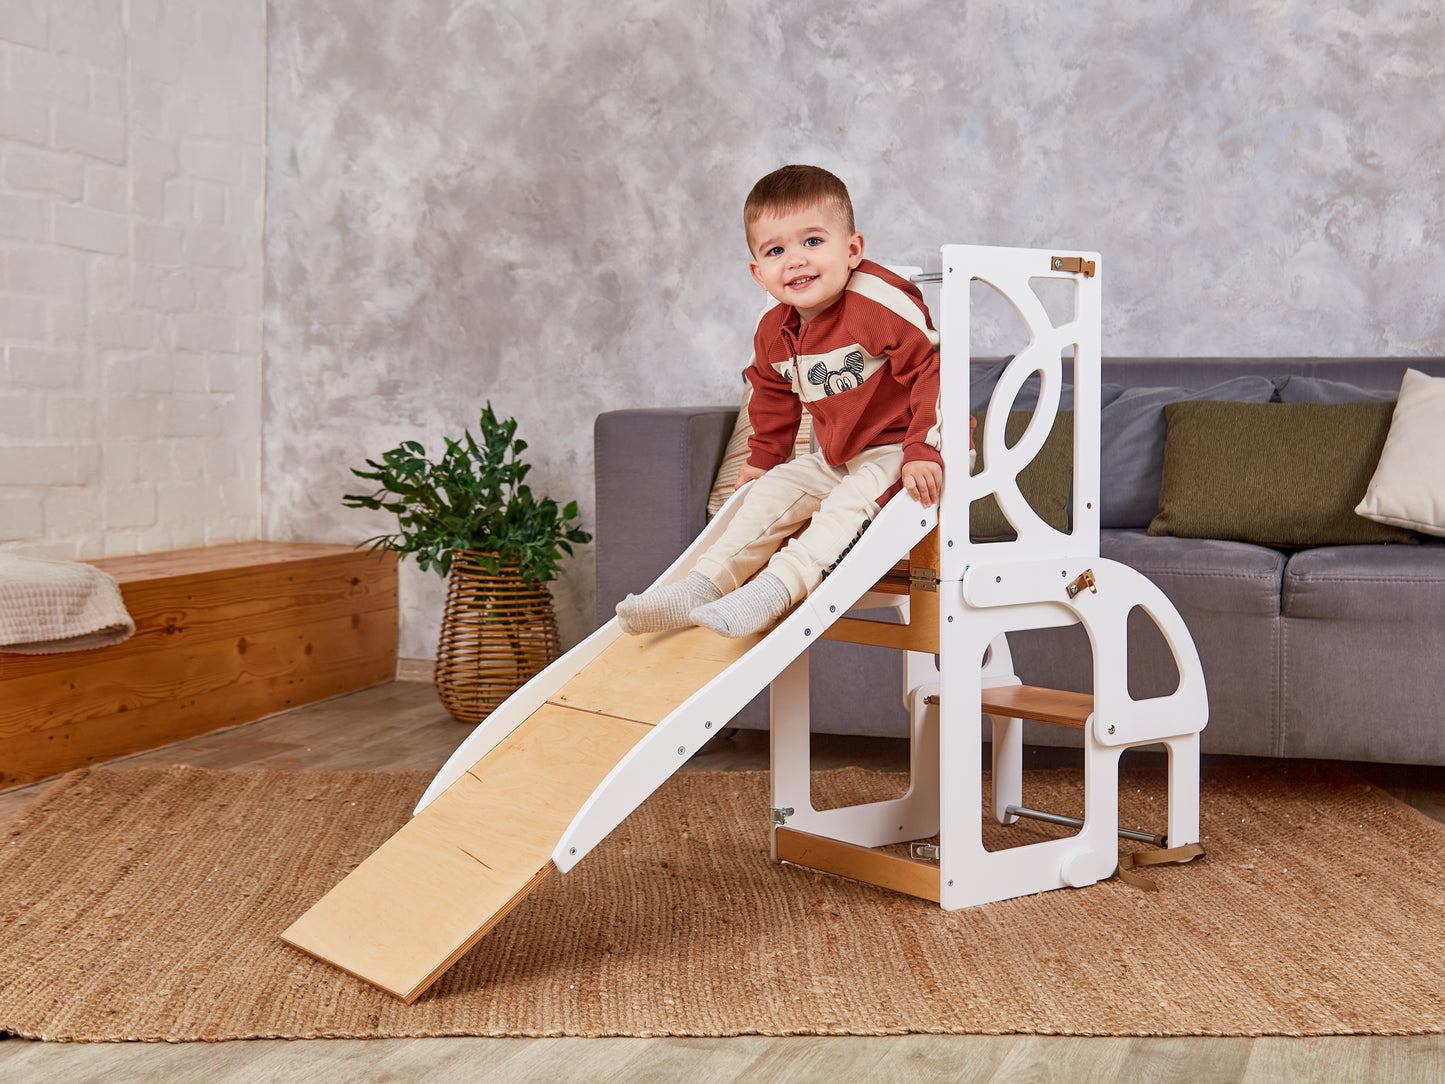 Learning helper tower table chair WITH A BACK!, montessori learning toddler tower